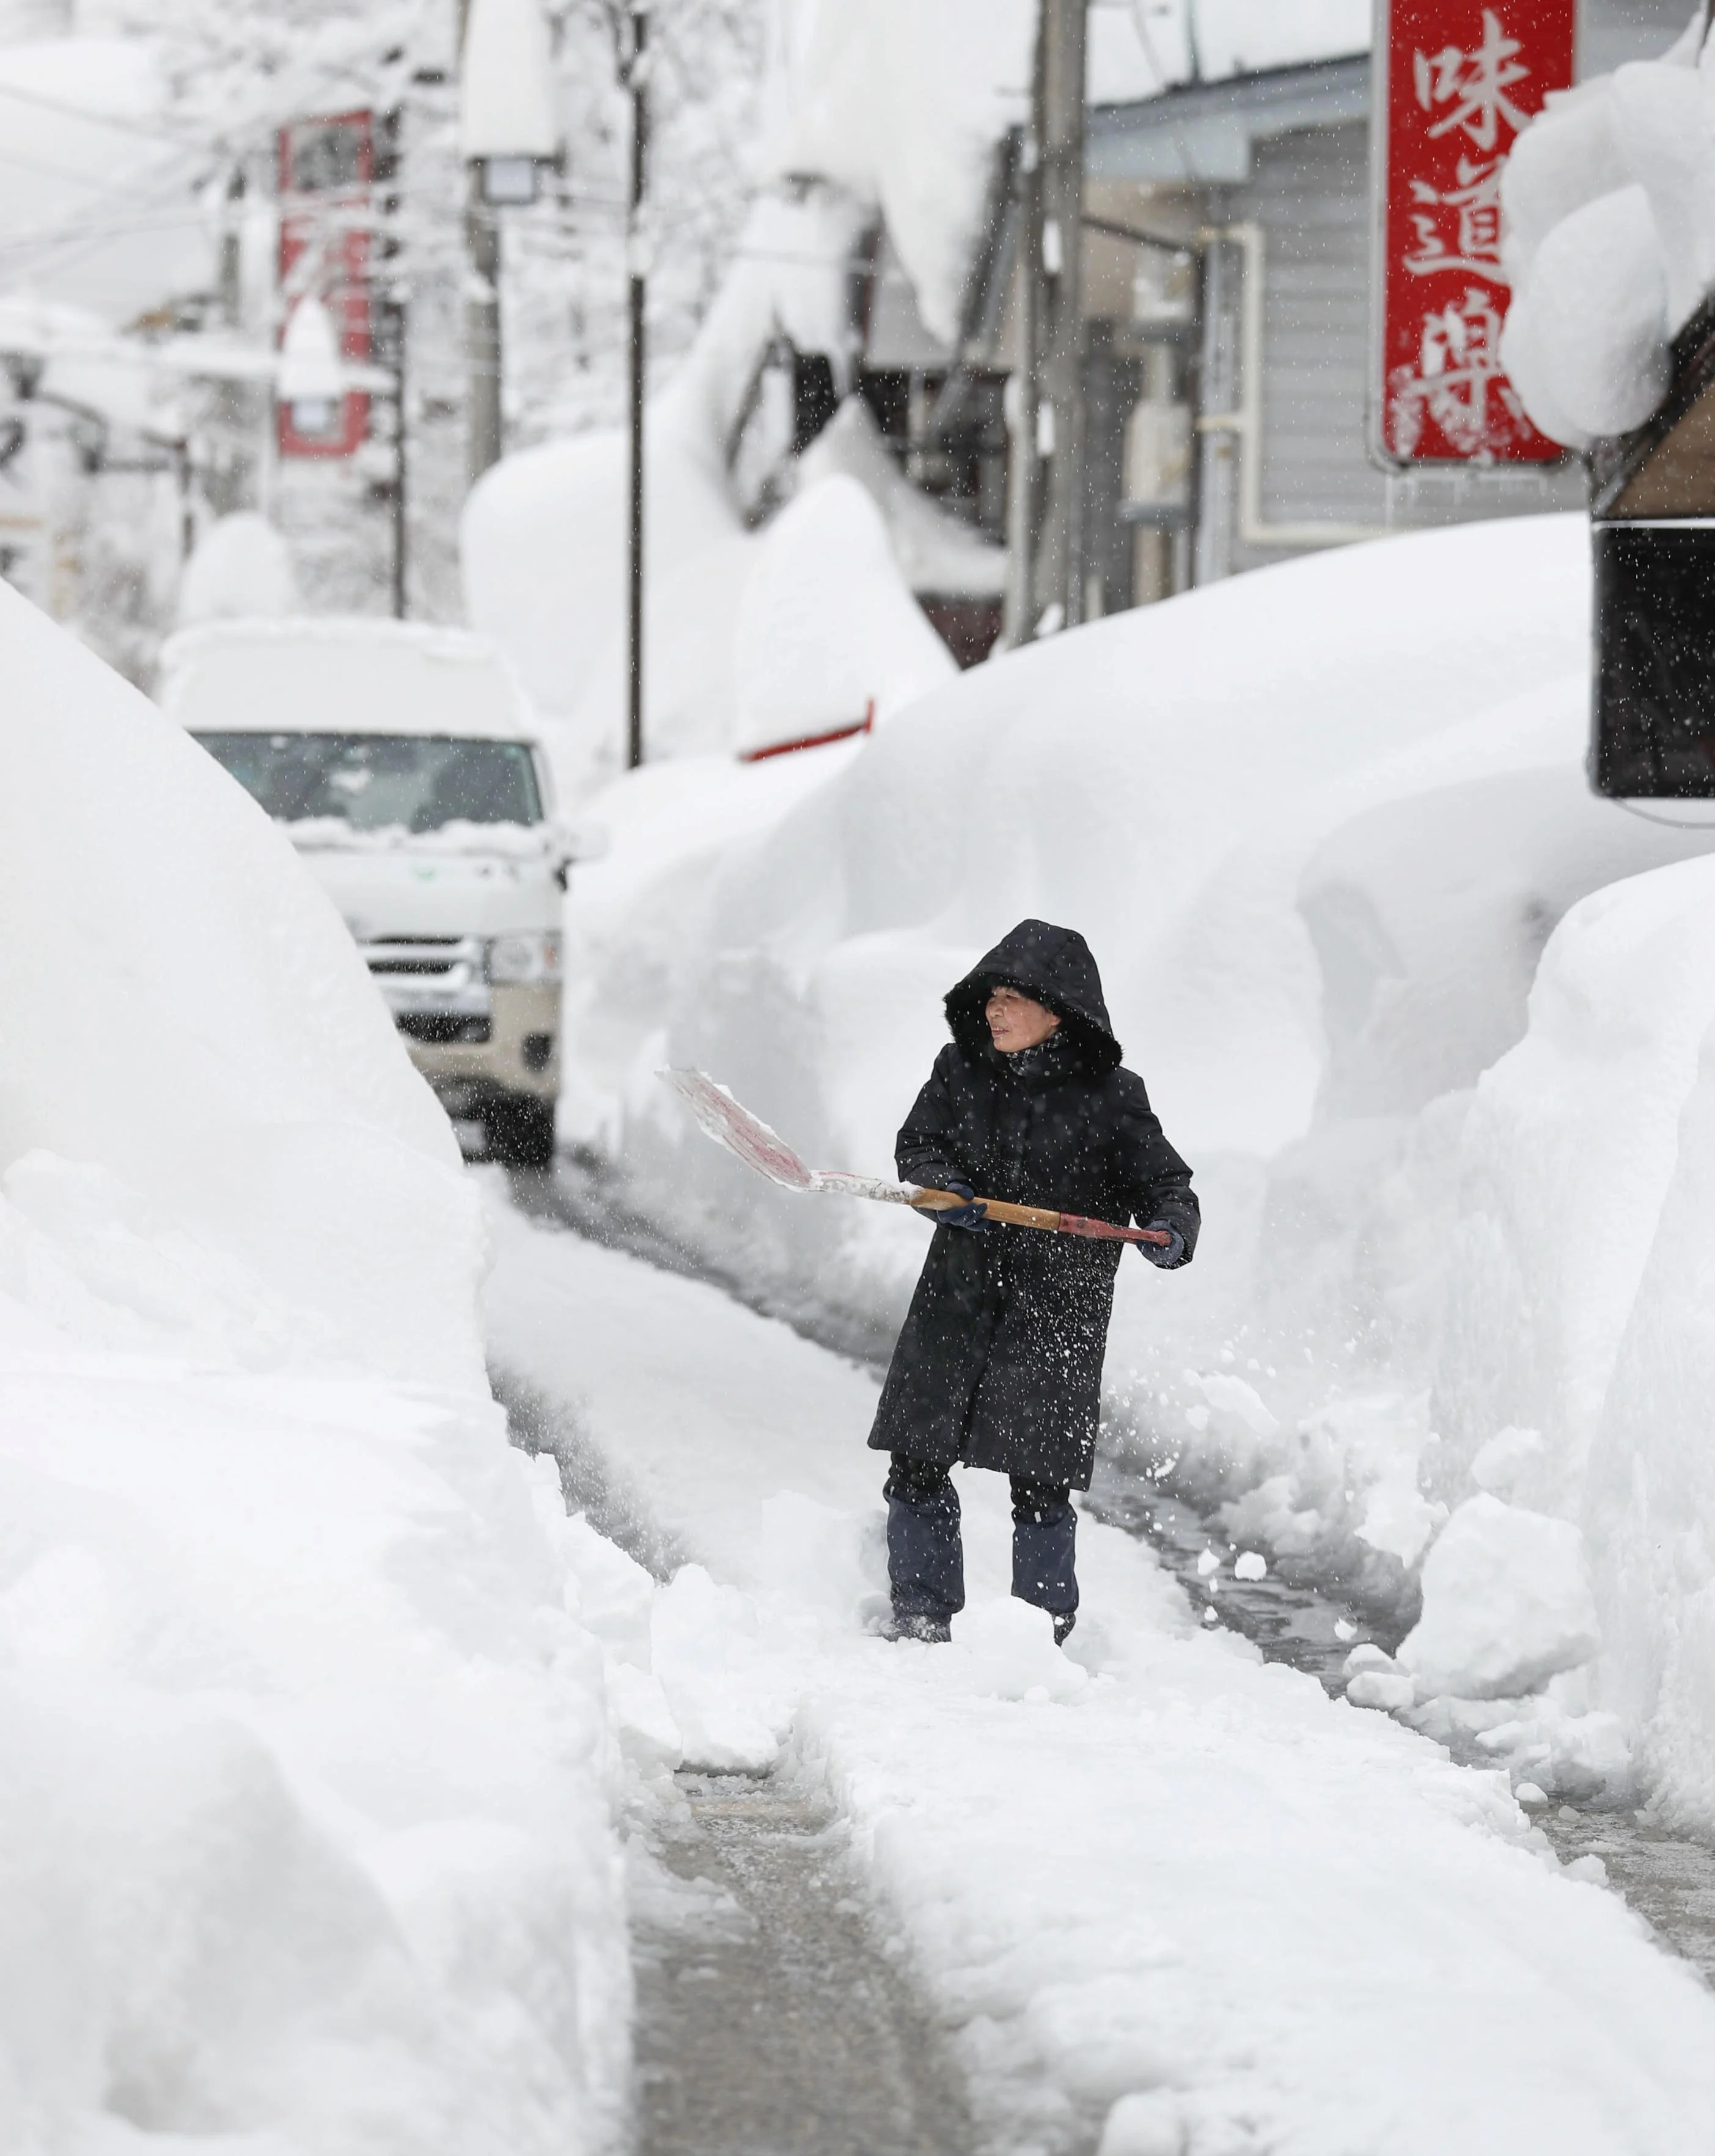 A woman removes snow on a street in Yuzawa, Niigata Prefecture, Japan in this photo taken by Kyodo December 17, 2020. Mandatory credit Kyodo/via REUTERS